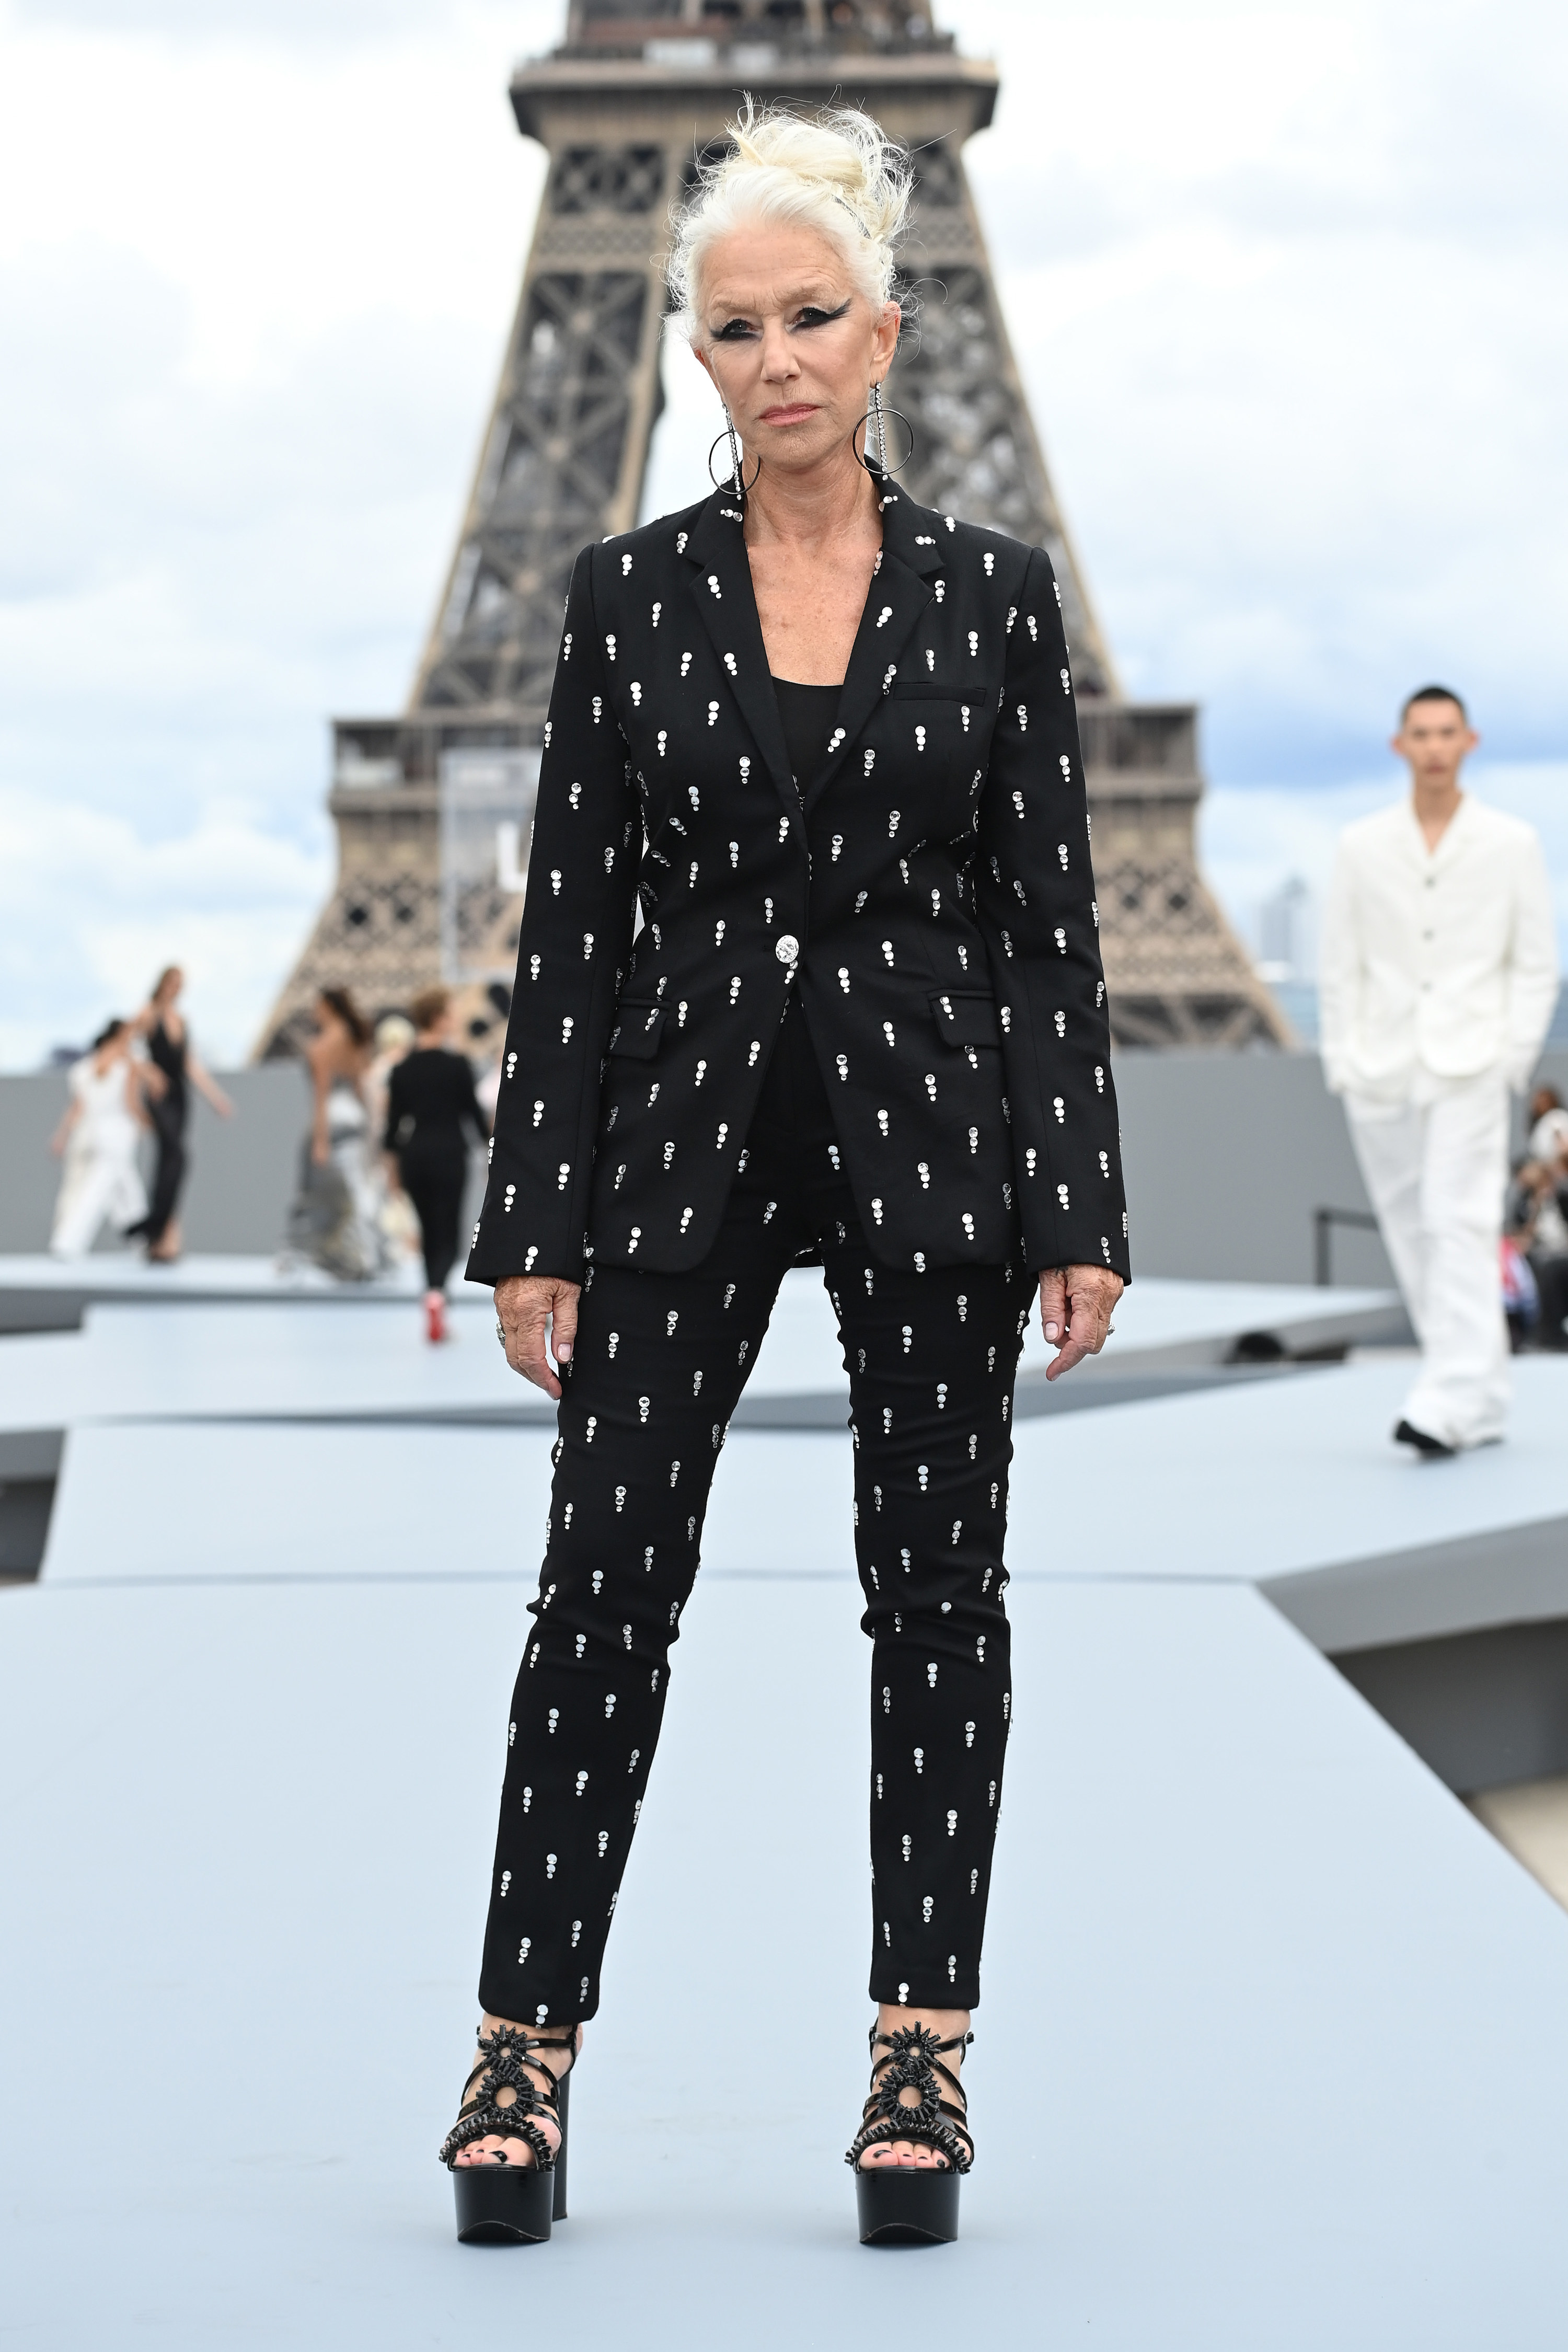 Walking in a fashion show in Paris with the Eiffel Tower in the background